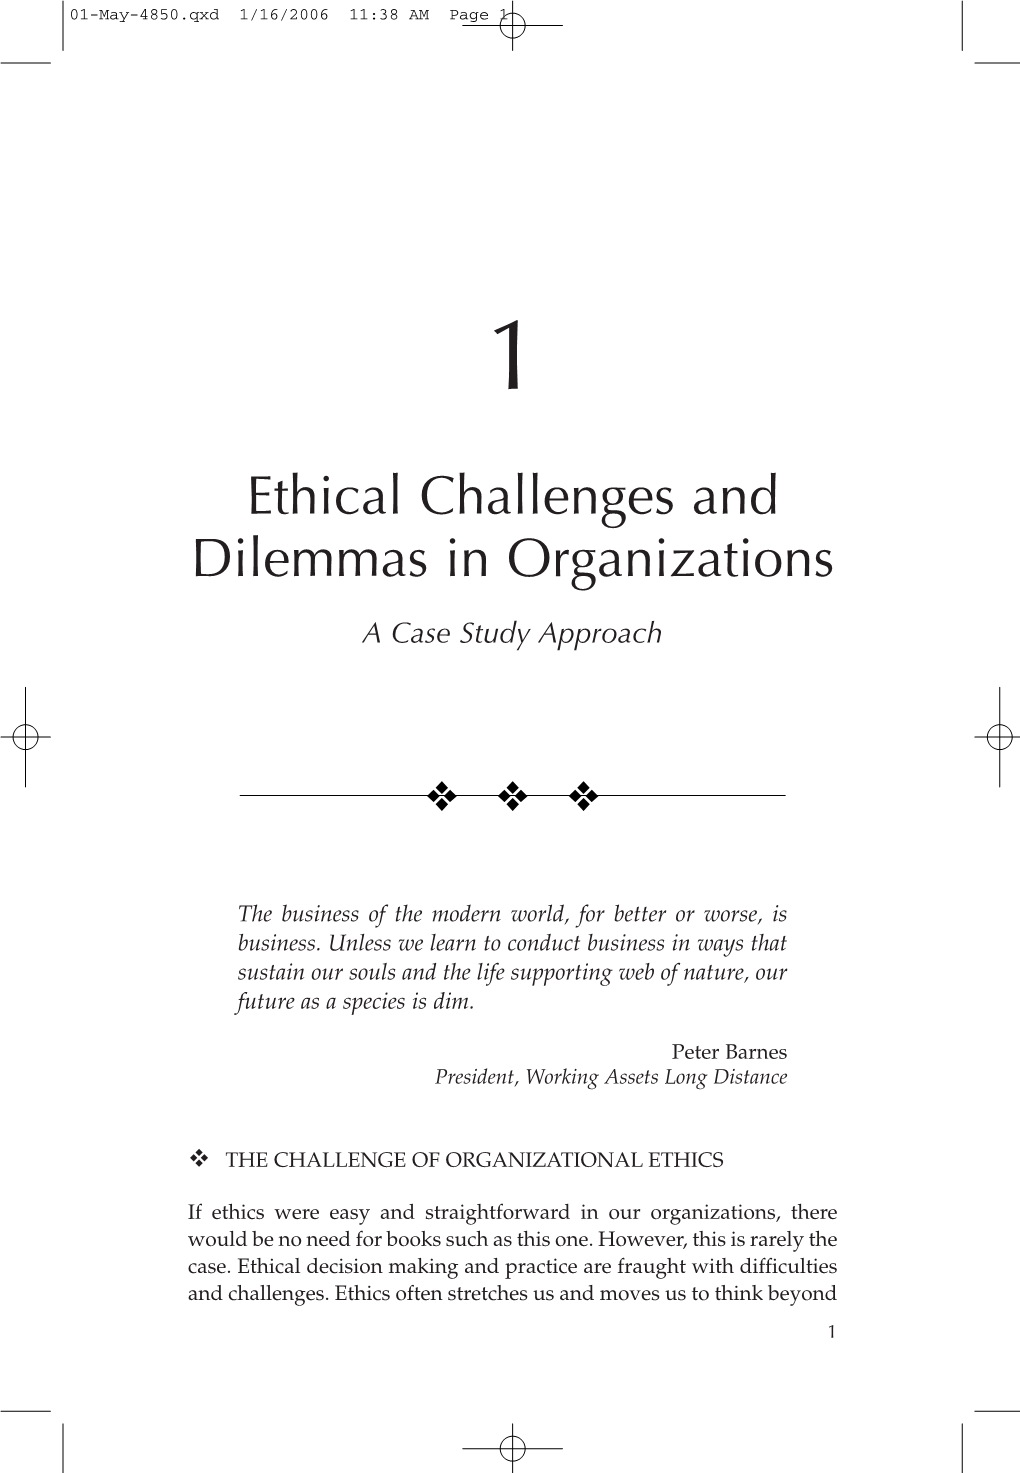 Ethical Challenges and Dilemmas in Organizations